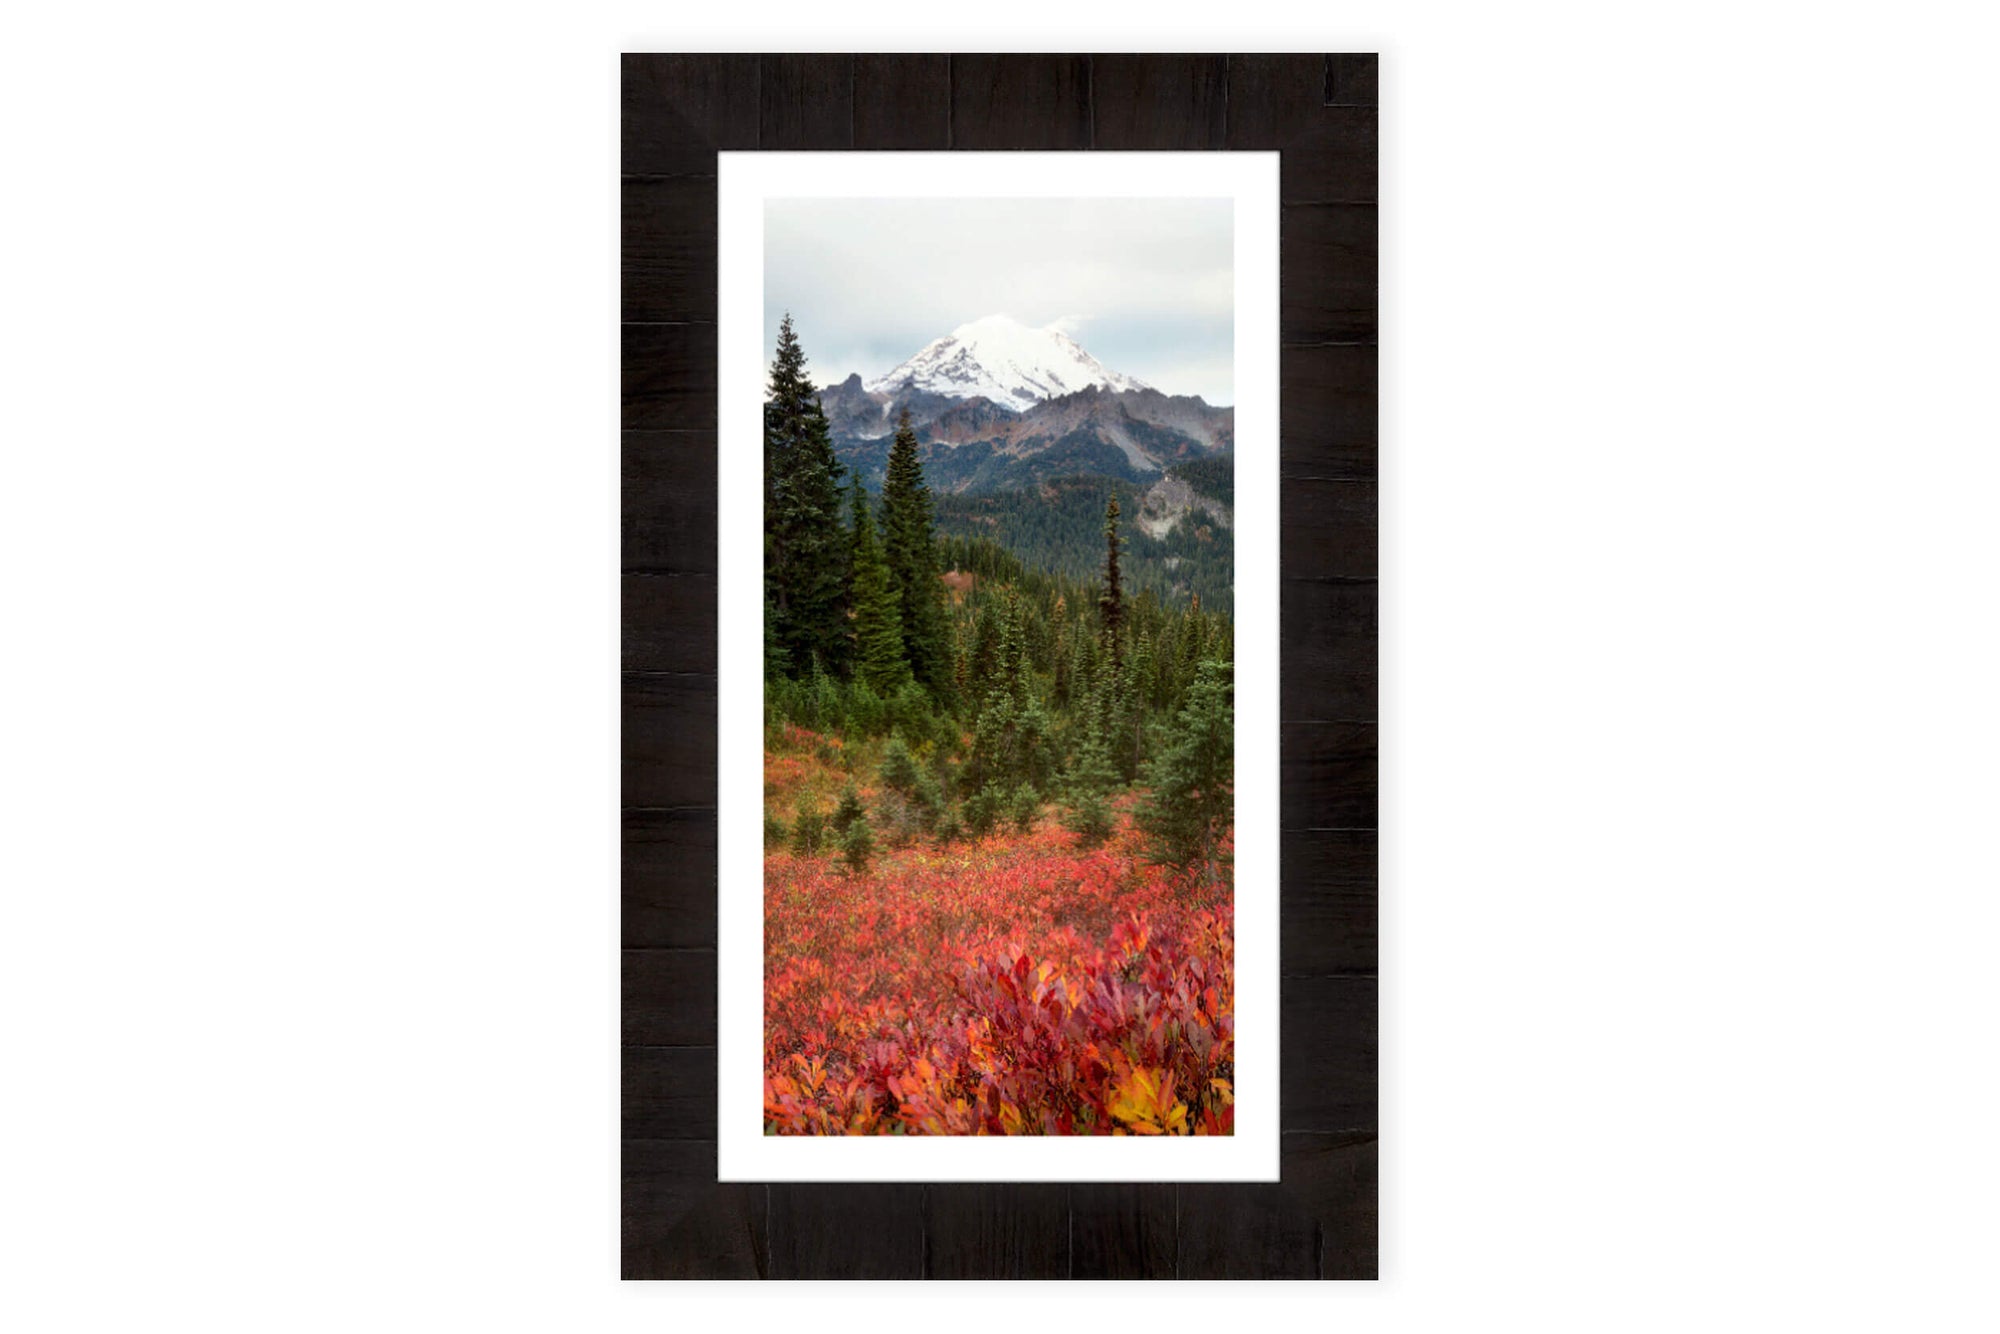 A piece of framed Seattle art shows the Mount Rainier fall colors.